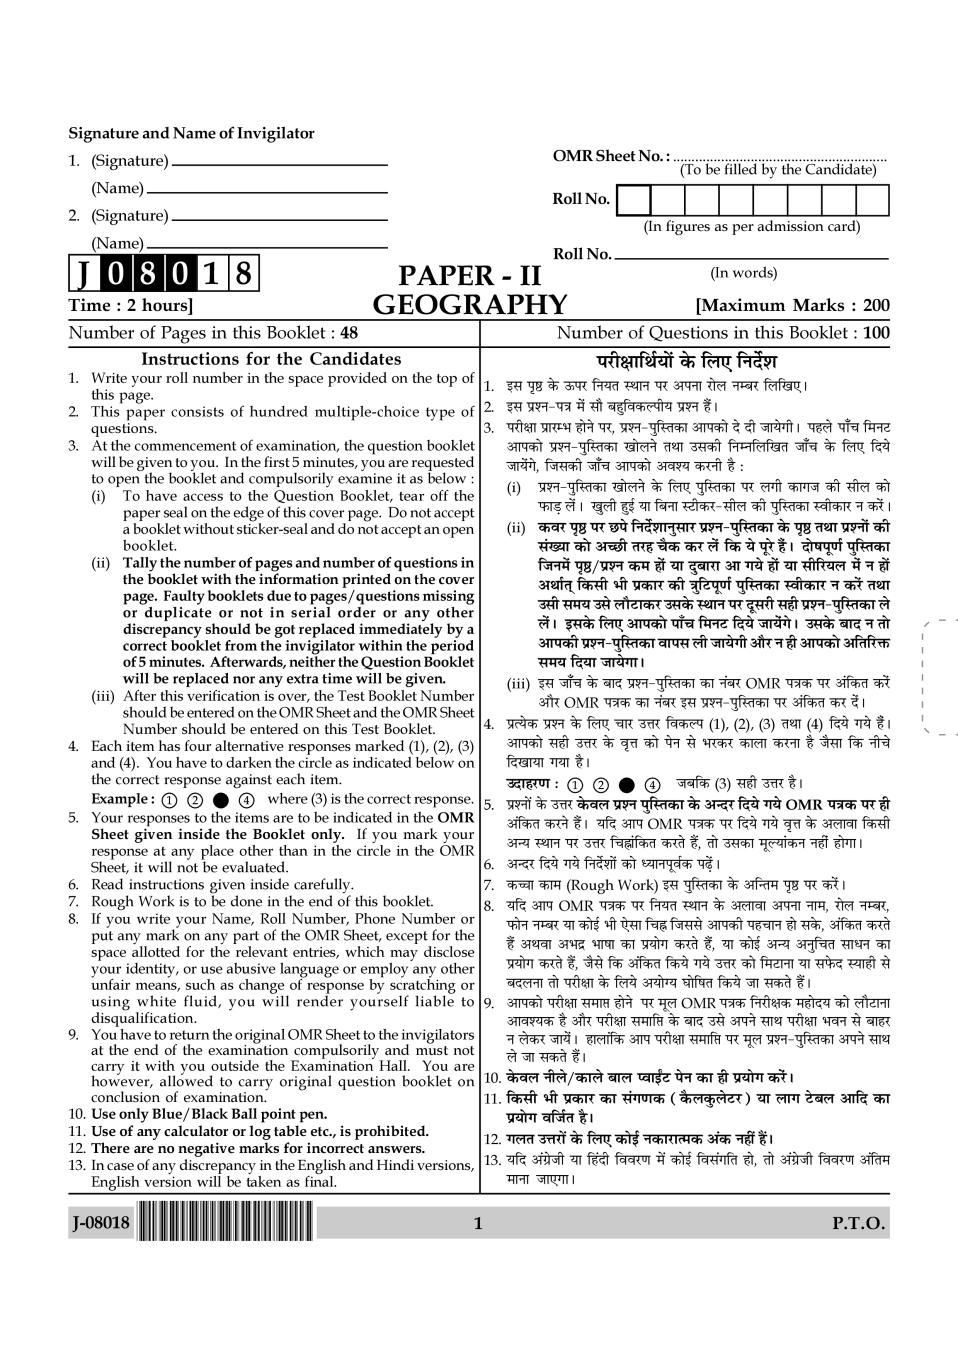 UGC NET Geography Question Paper 2018 - Page 1